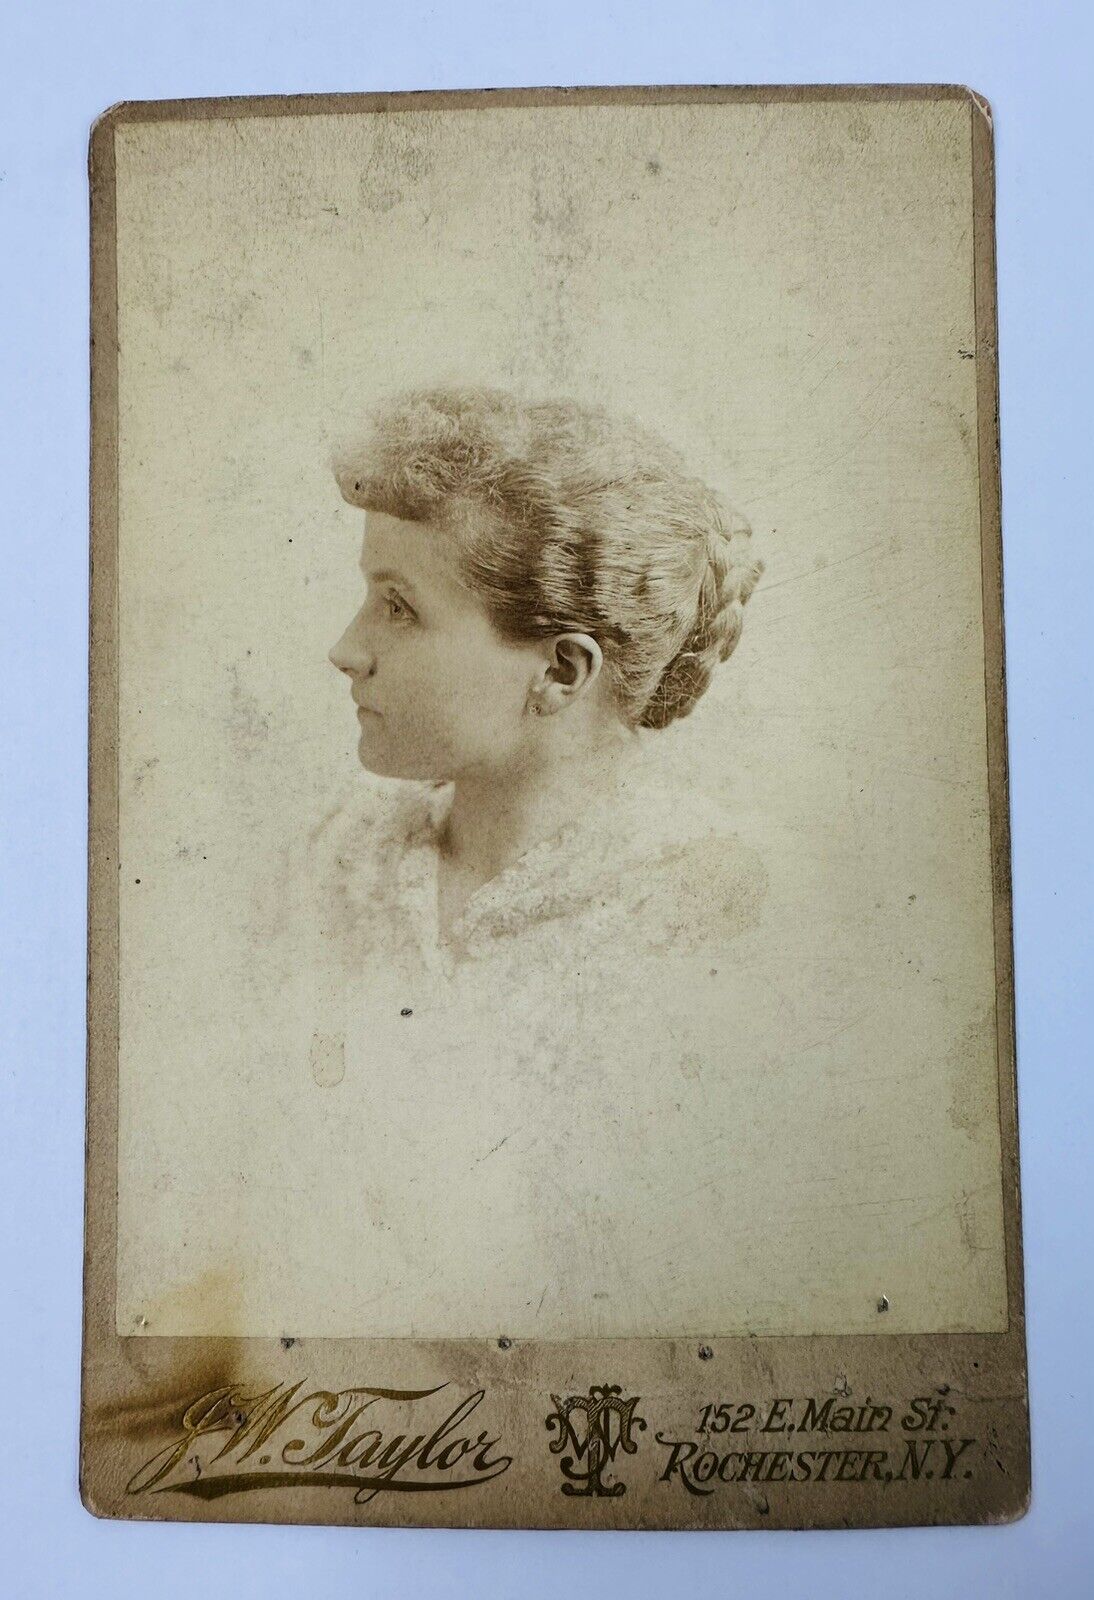 Antique Cabinet Card Photograph #17 - Portrait Of Woman ROCHESTER, NY